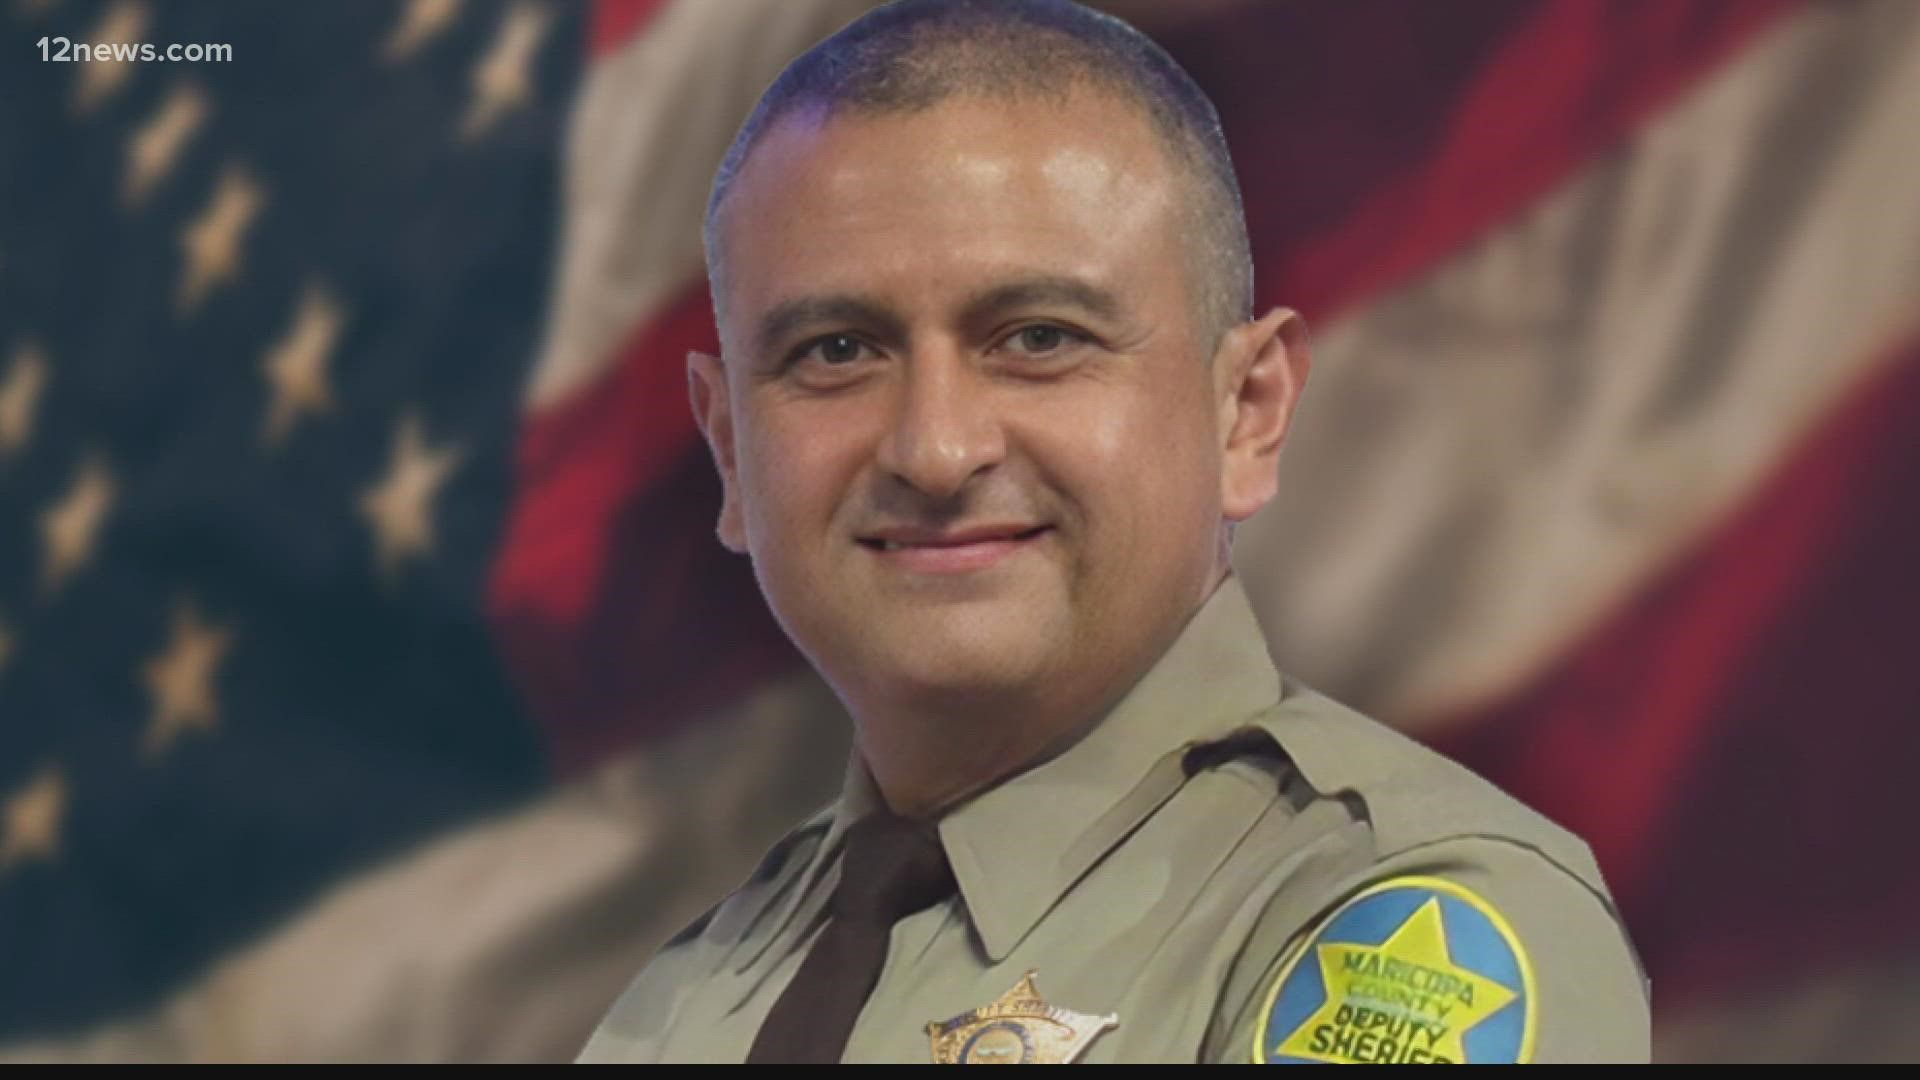 MCSO Deputy Juan Ruiz was taken off life support and has died after being shot by a suspect on Satruday. His family plans to donate his organs.